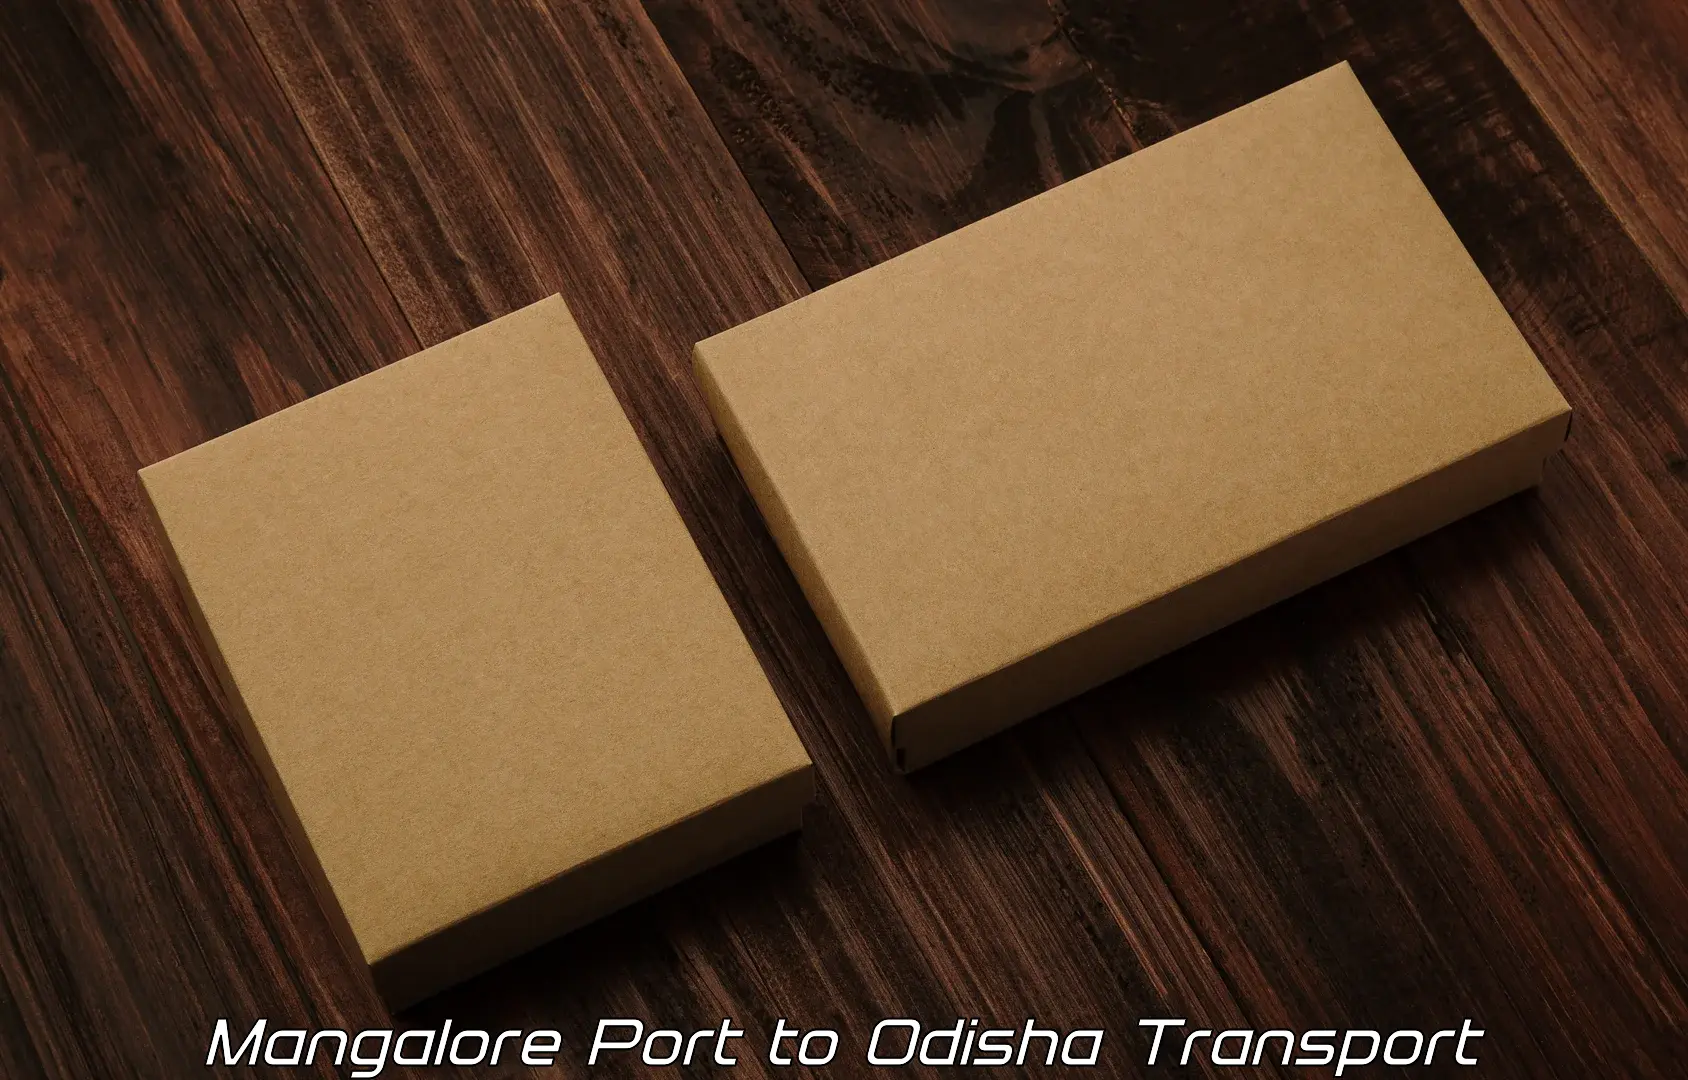 Daily parcel service transport in Mangalore Port to Balikuda